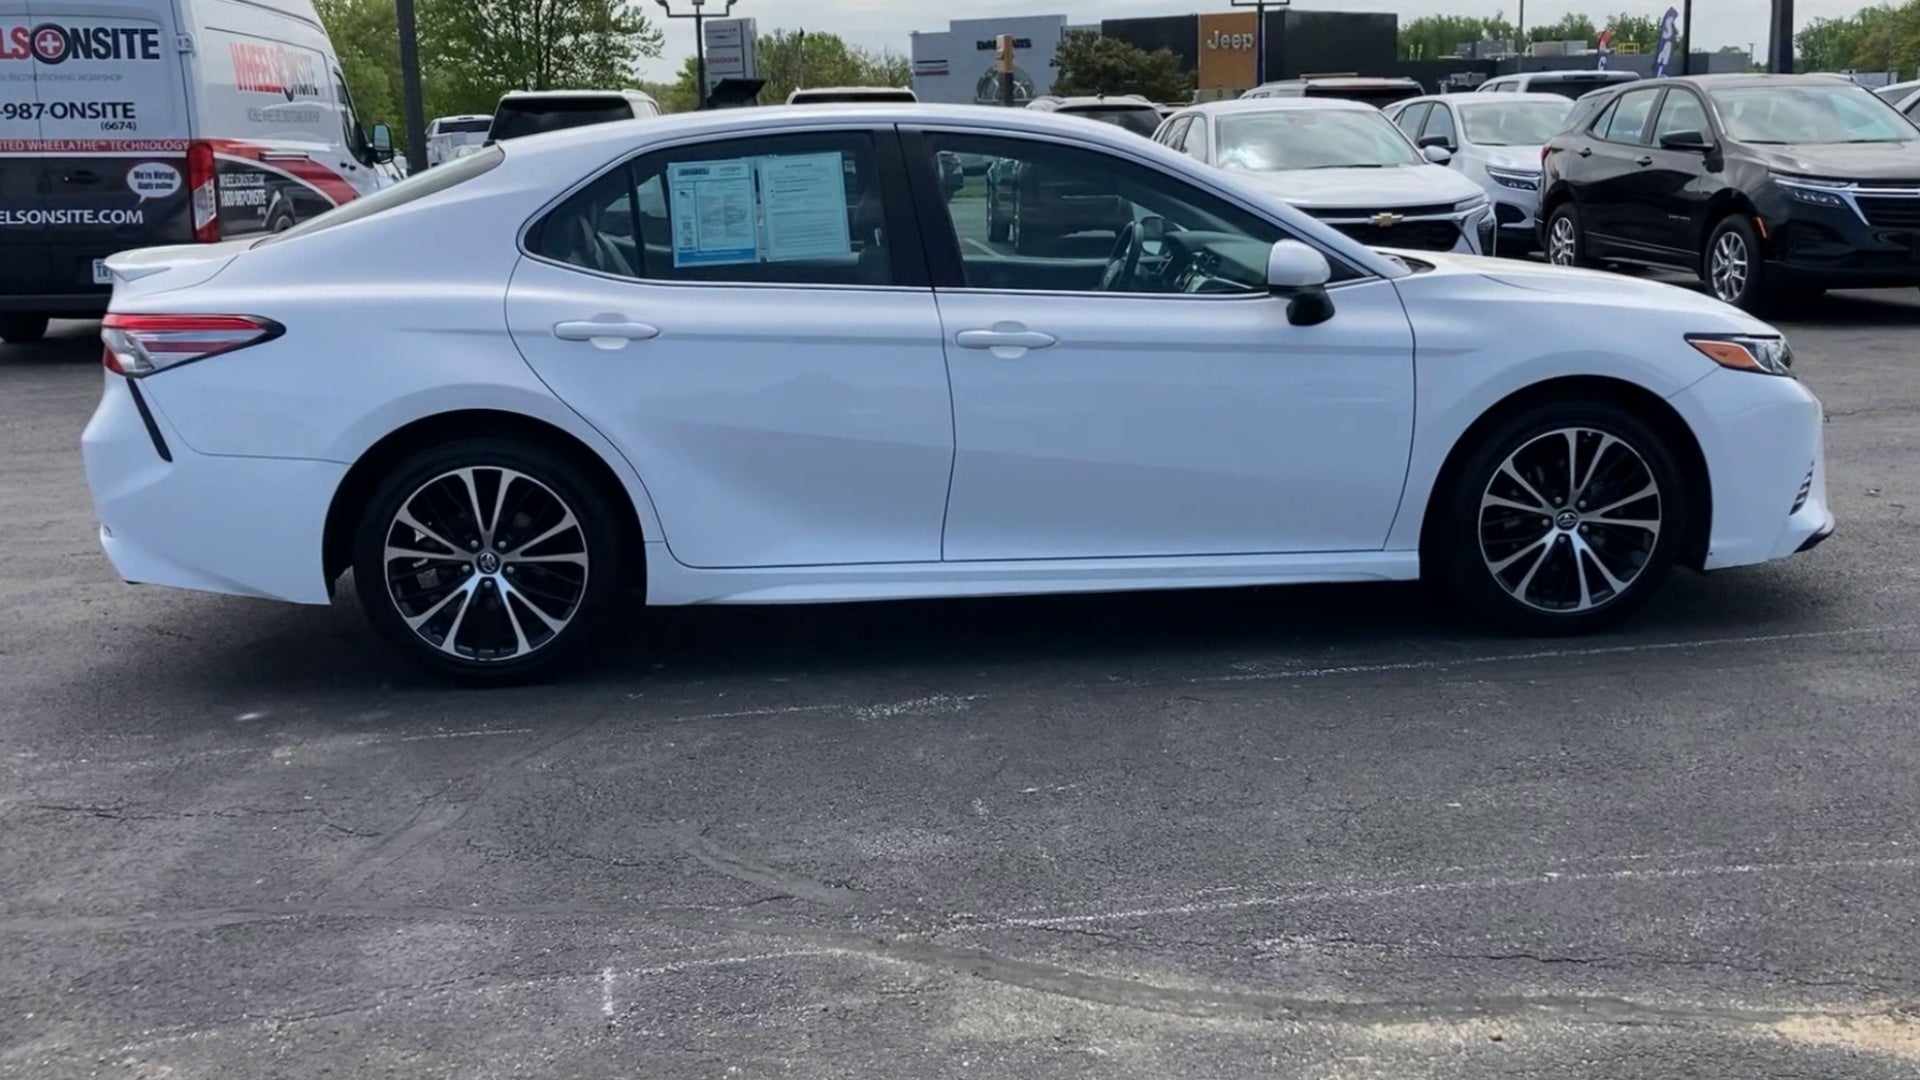 2018 Toyota Camry LE